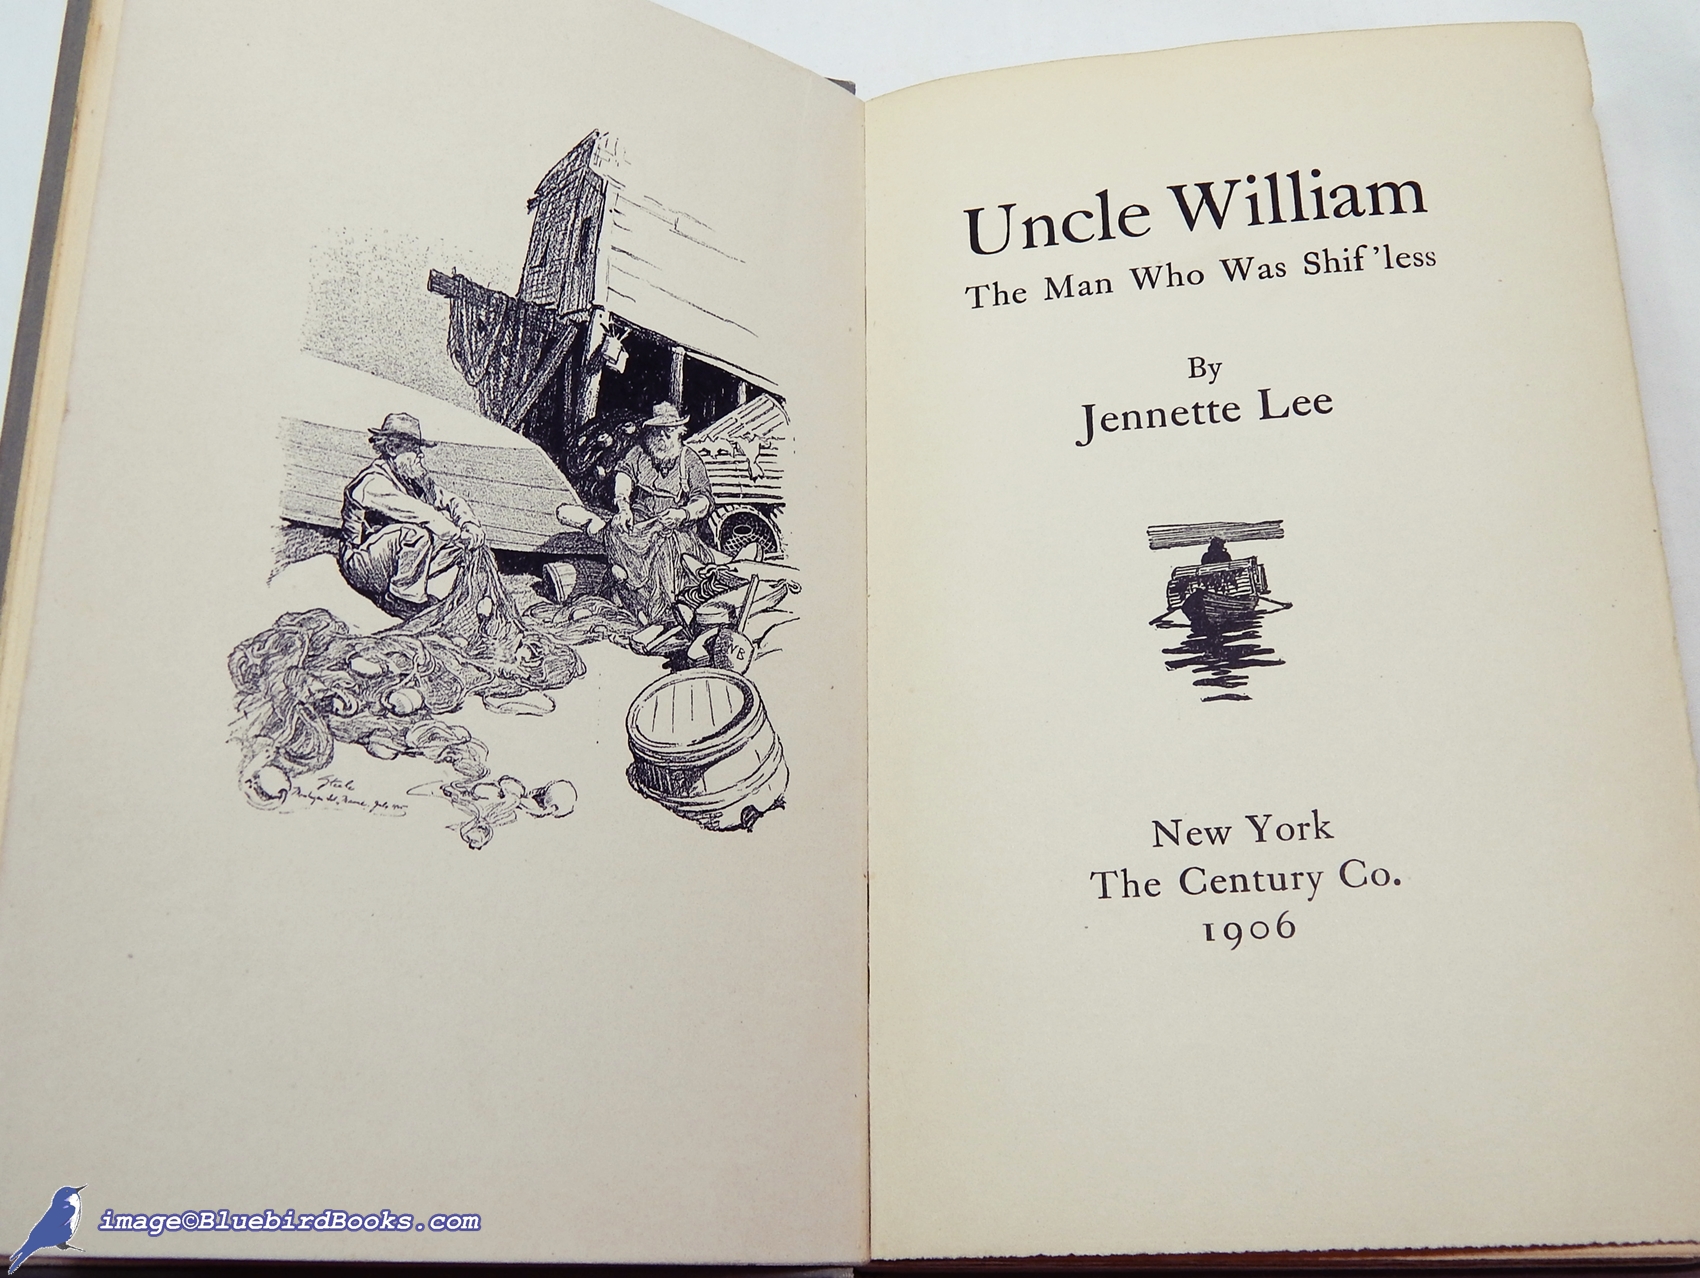 LEE, JENNETTE - Uncle William: The Man Who Was Shif'Less